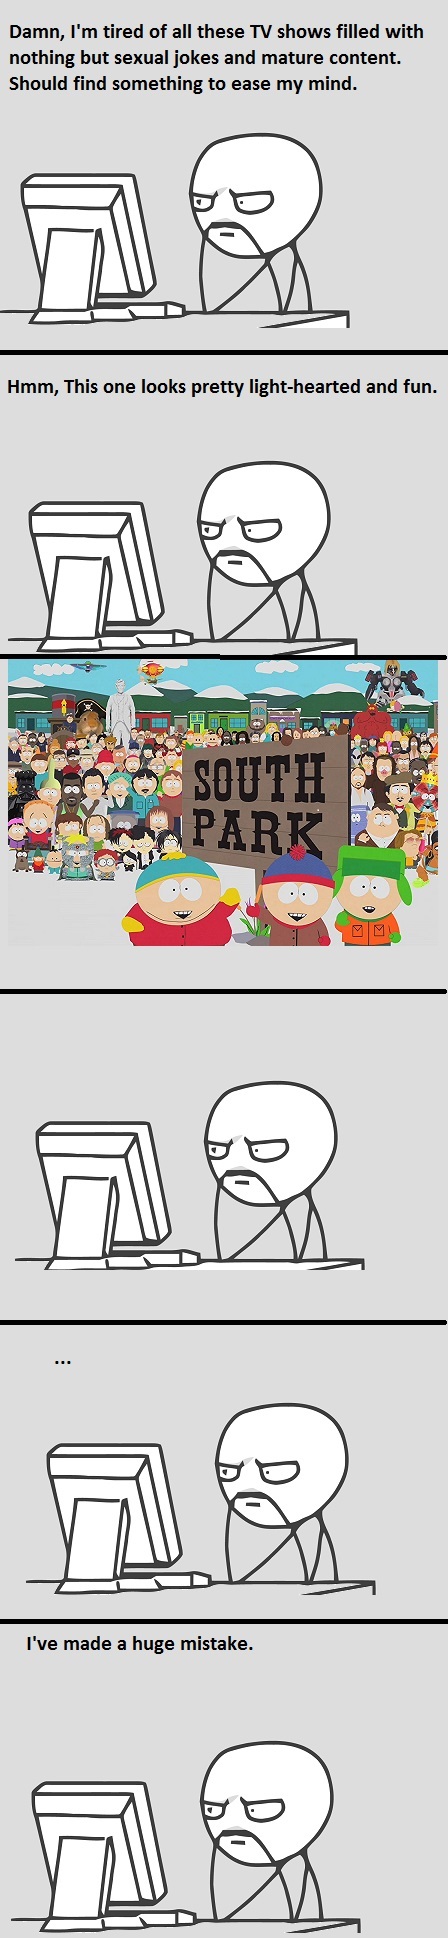 South Park is the greatest TV show of all time for me. - meme